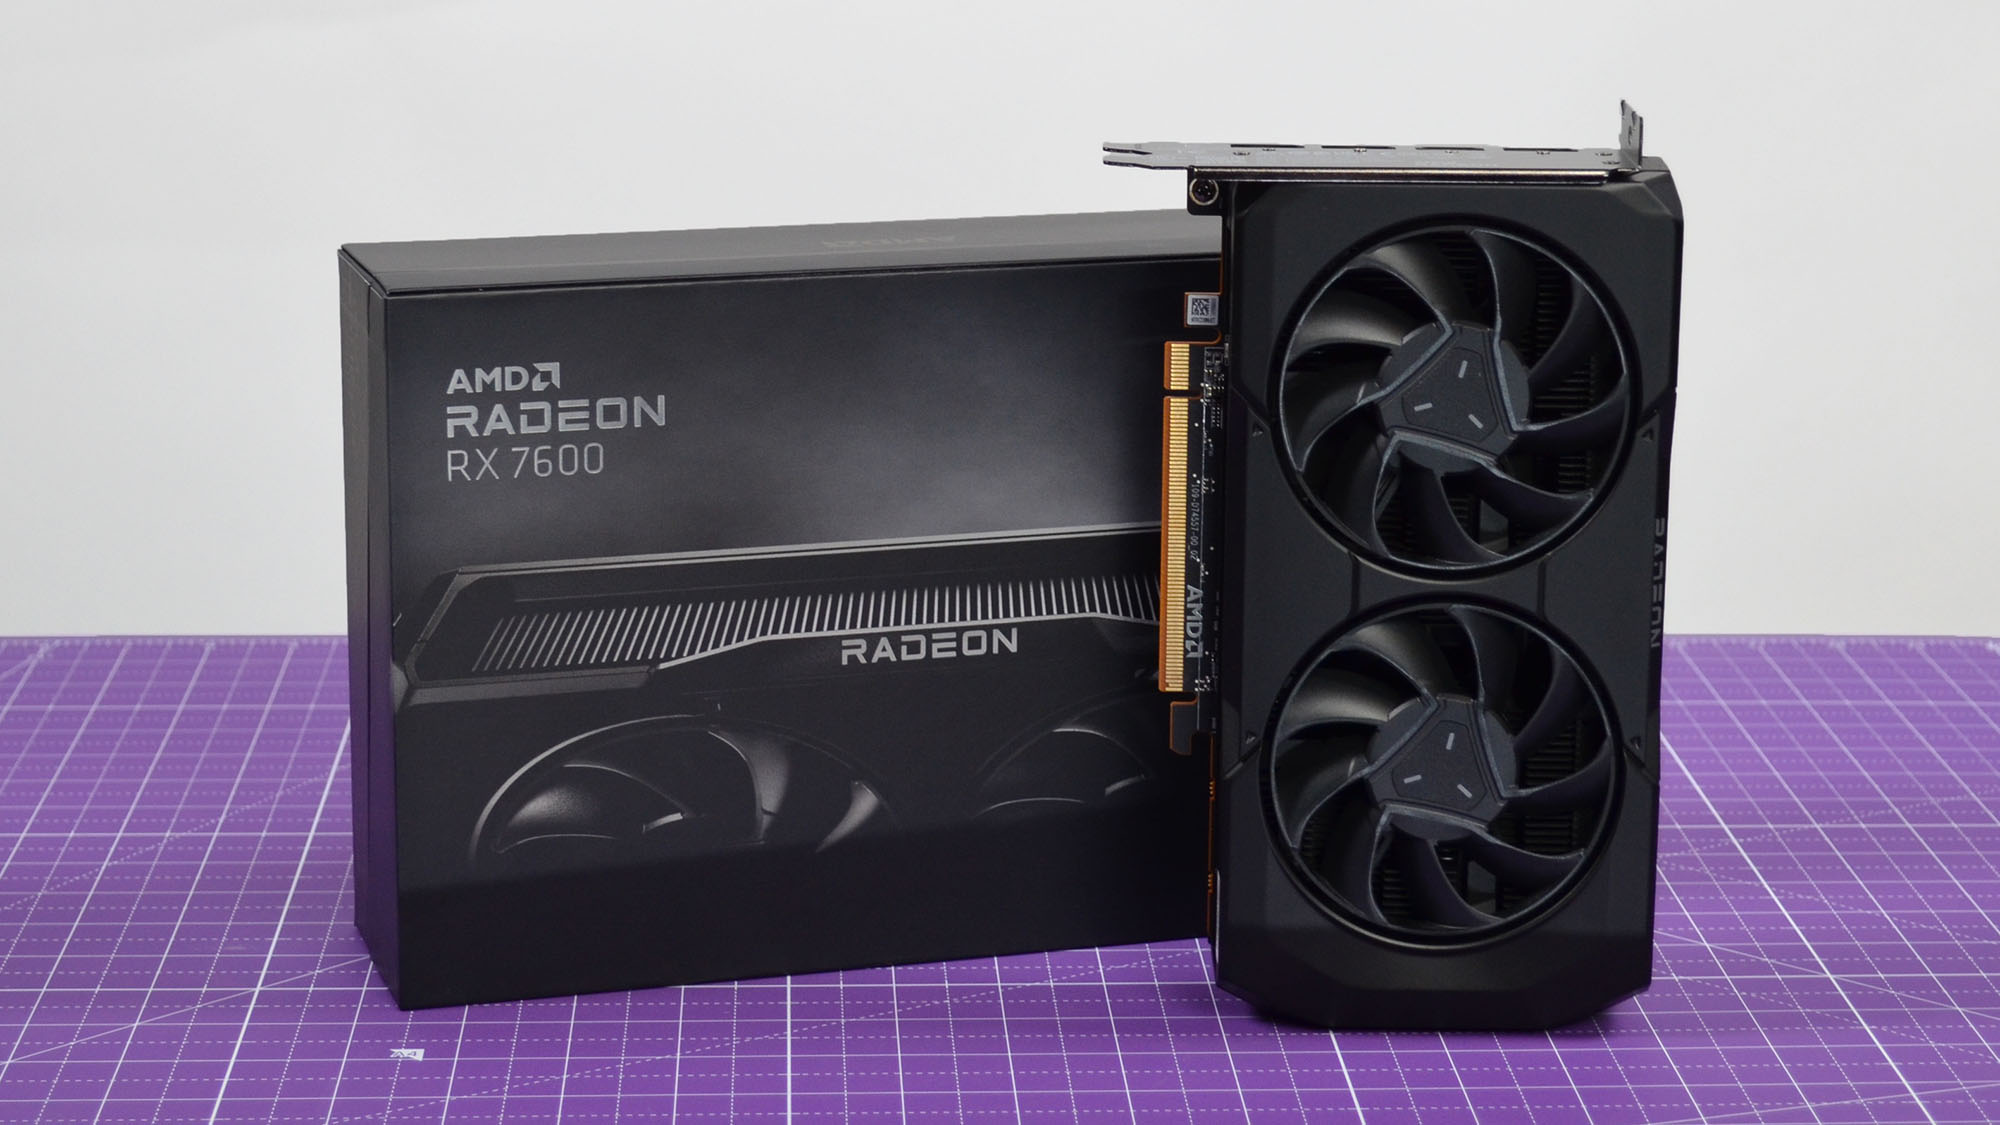 AMD Radeon RX 7600 GPU Review: Presenting the new king of 1080P gaming